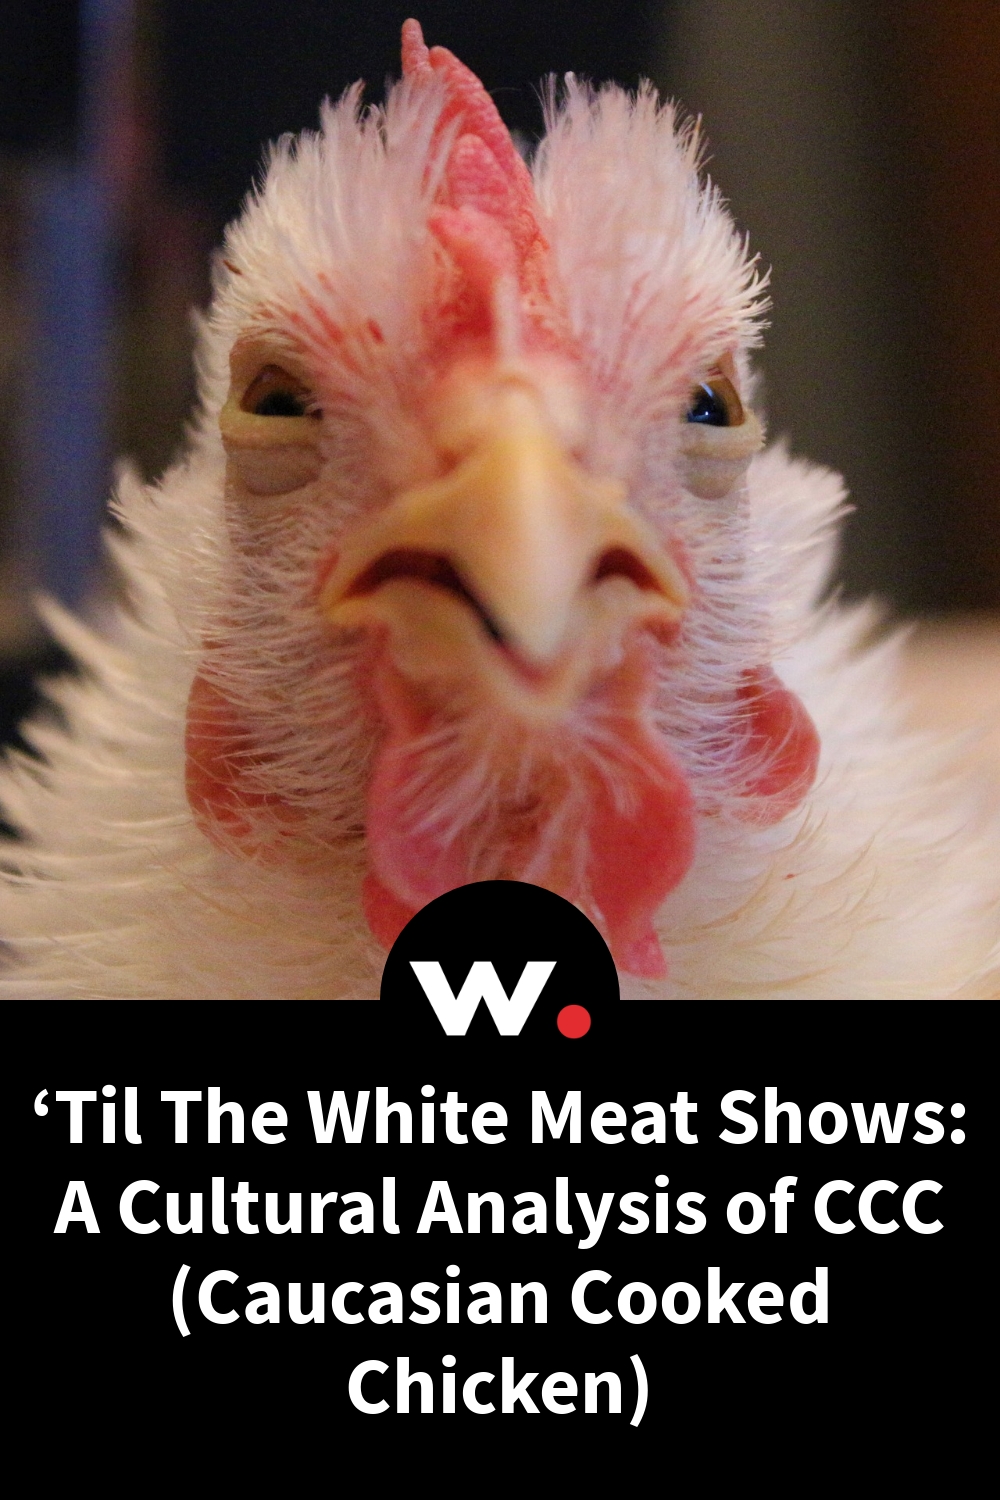 ‘Til The White Meat Shows: A Cultural Analysis of CCC (Caucasian Cooked Chicken)